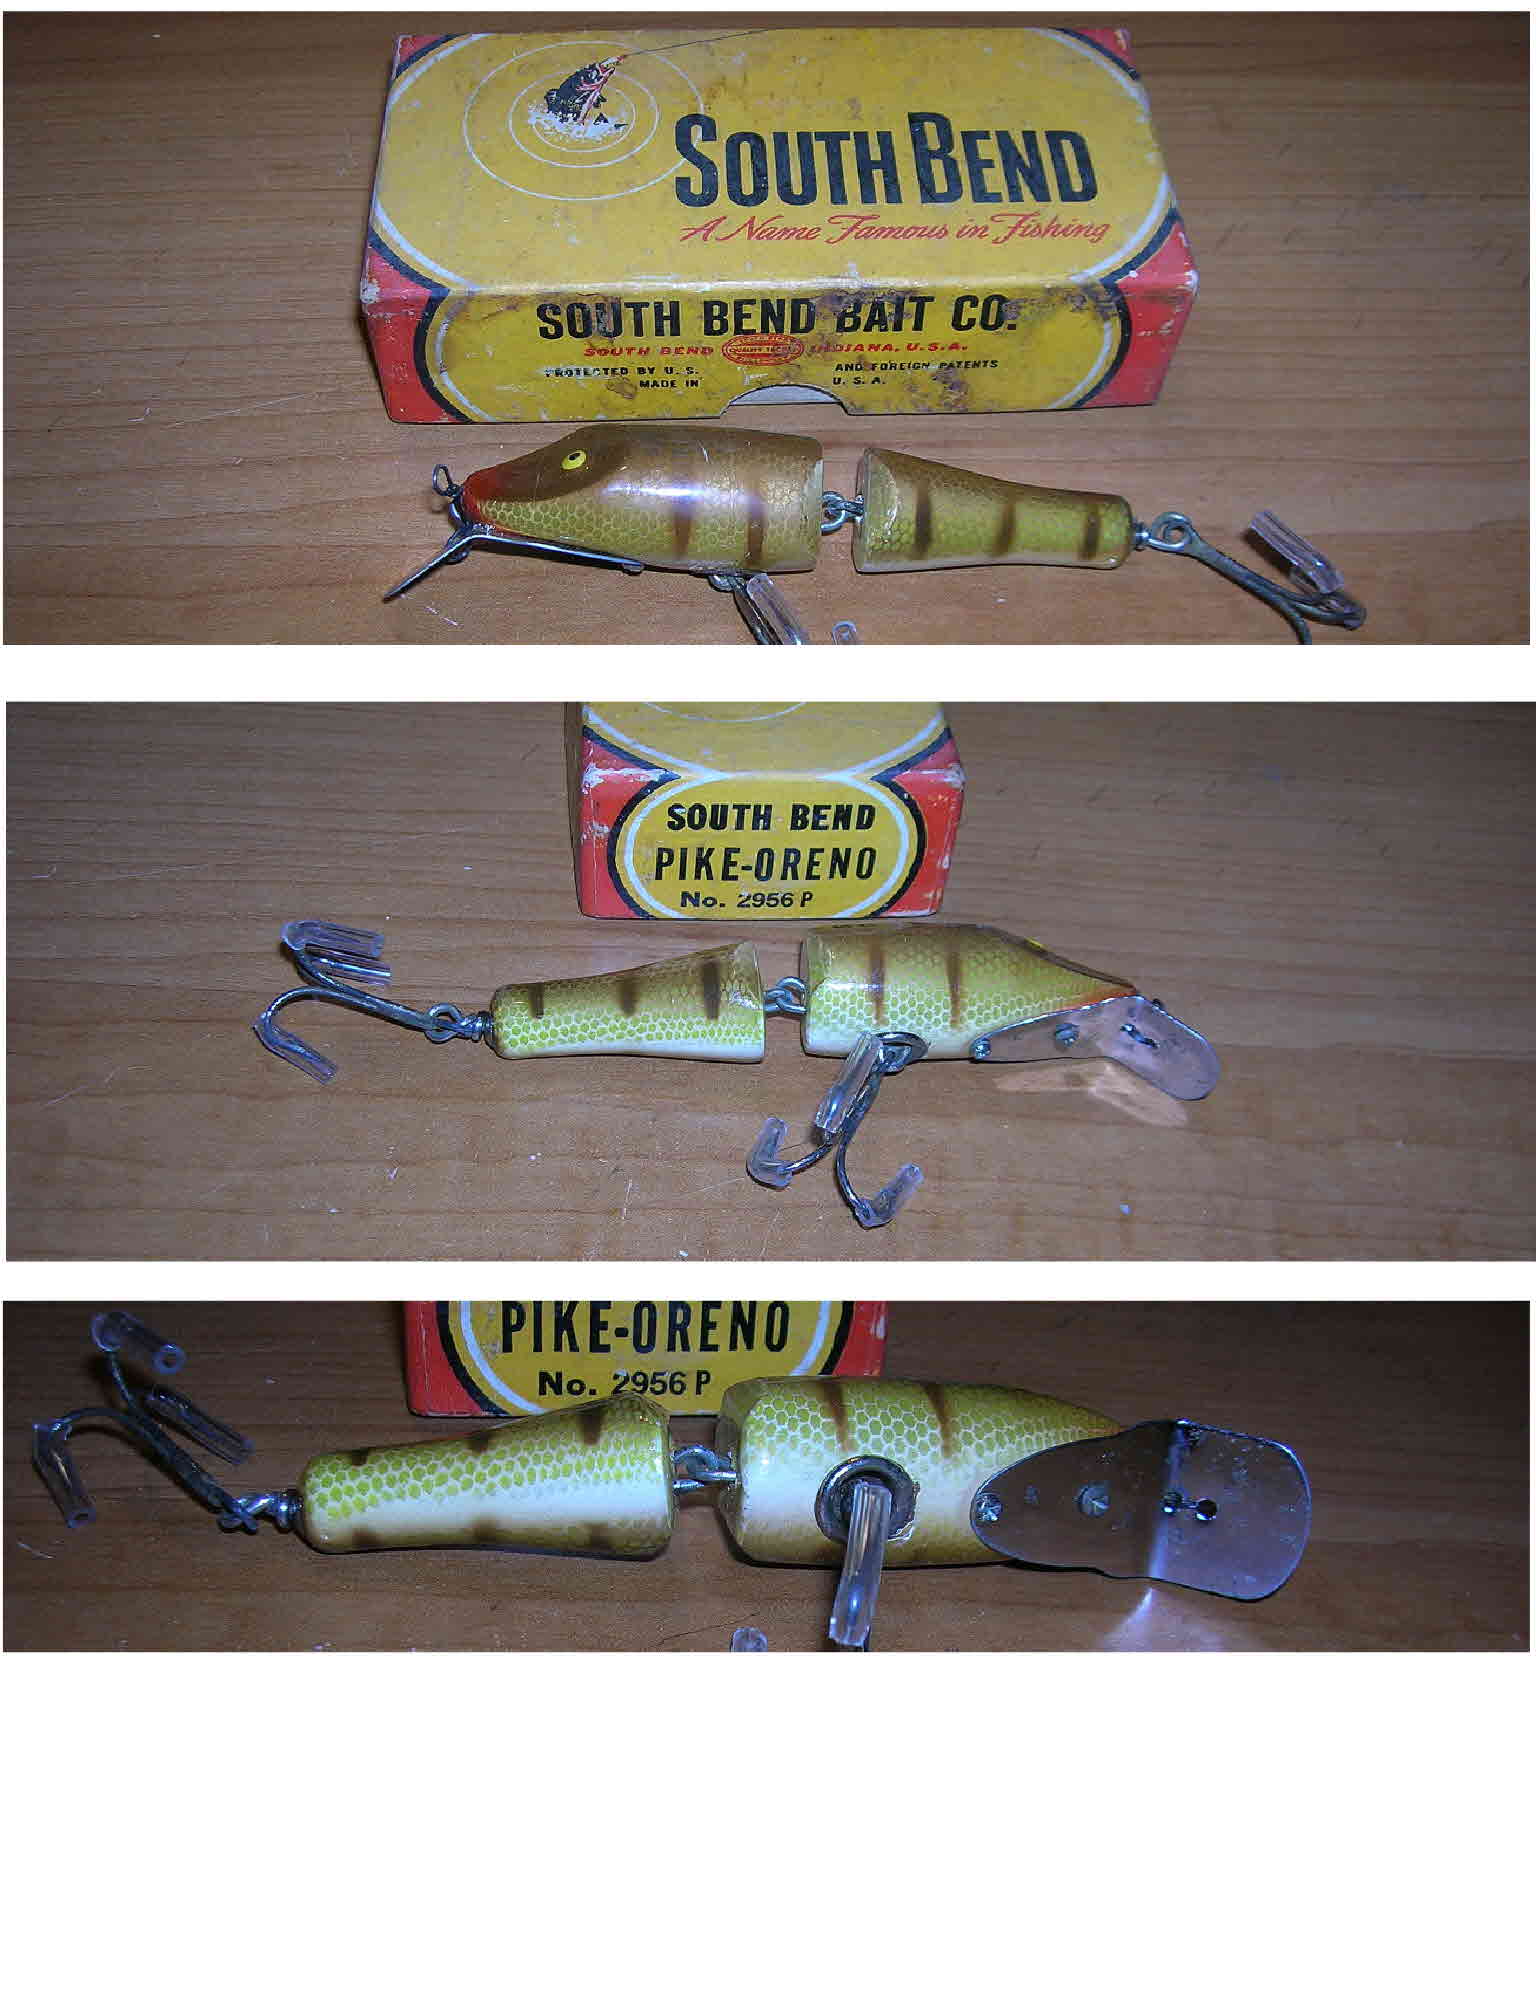 https://www.fishingcollectables.com/images/so281.jpg